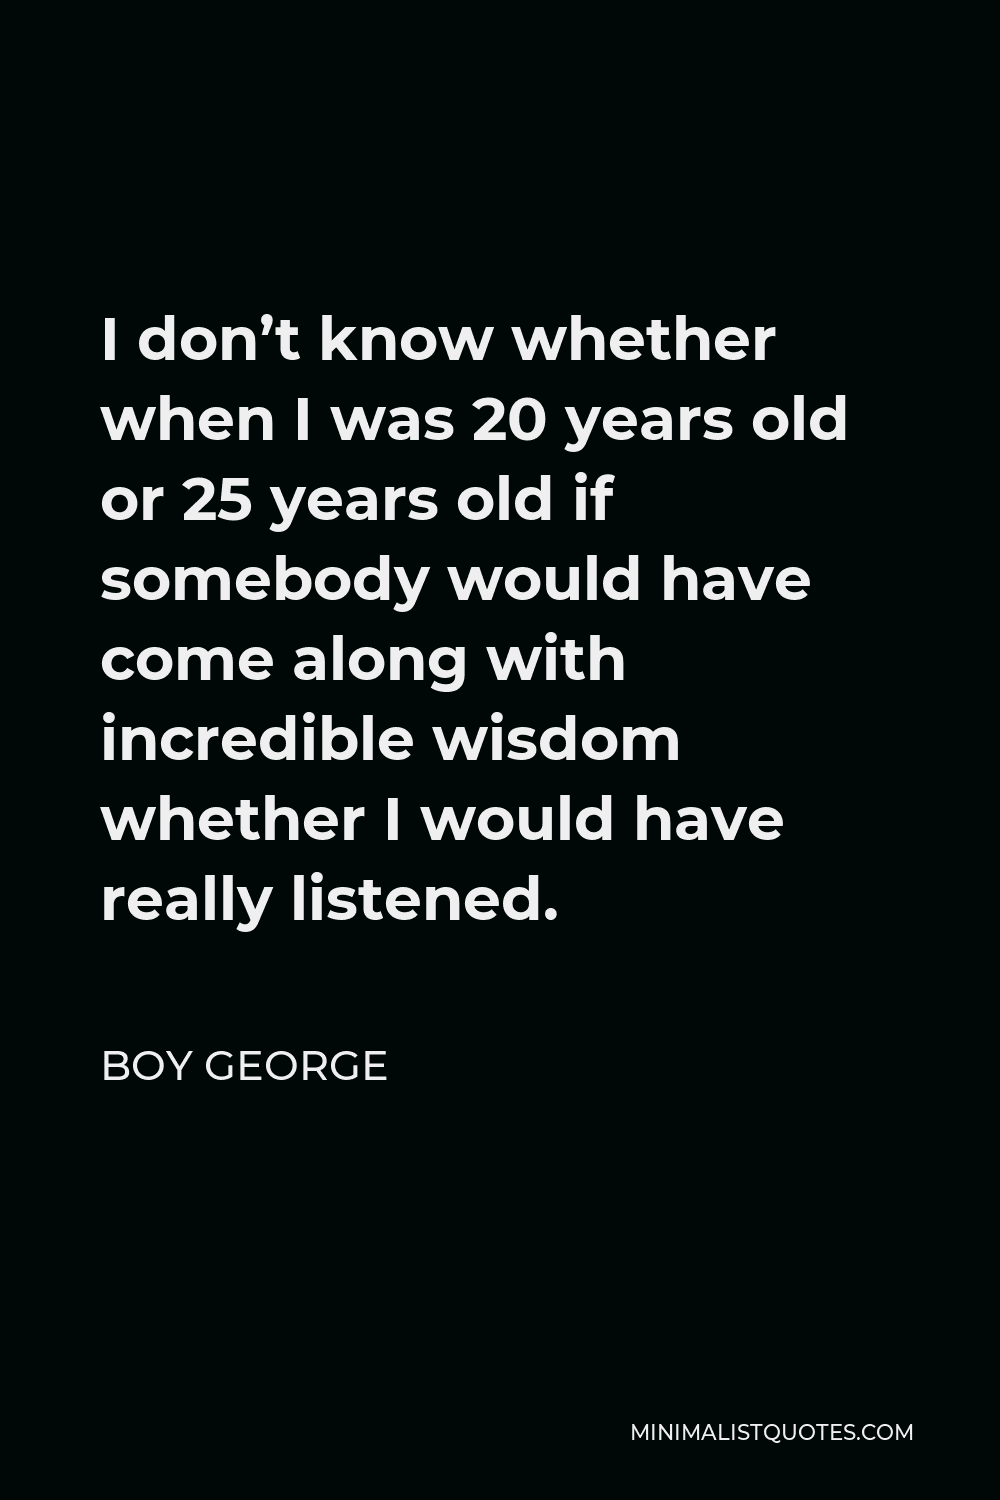 Boy George Quote - I don’t know whether when I was 20 years old or 25 years old if somebody would have come along with incredible wisdom whether I would have really listened.